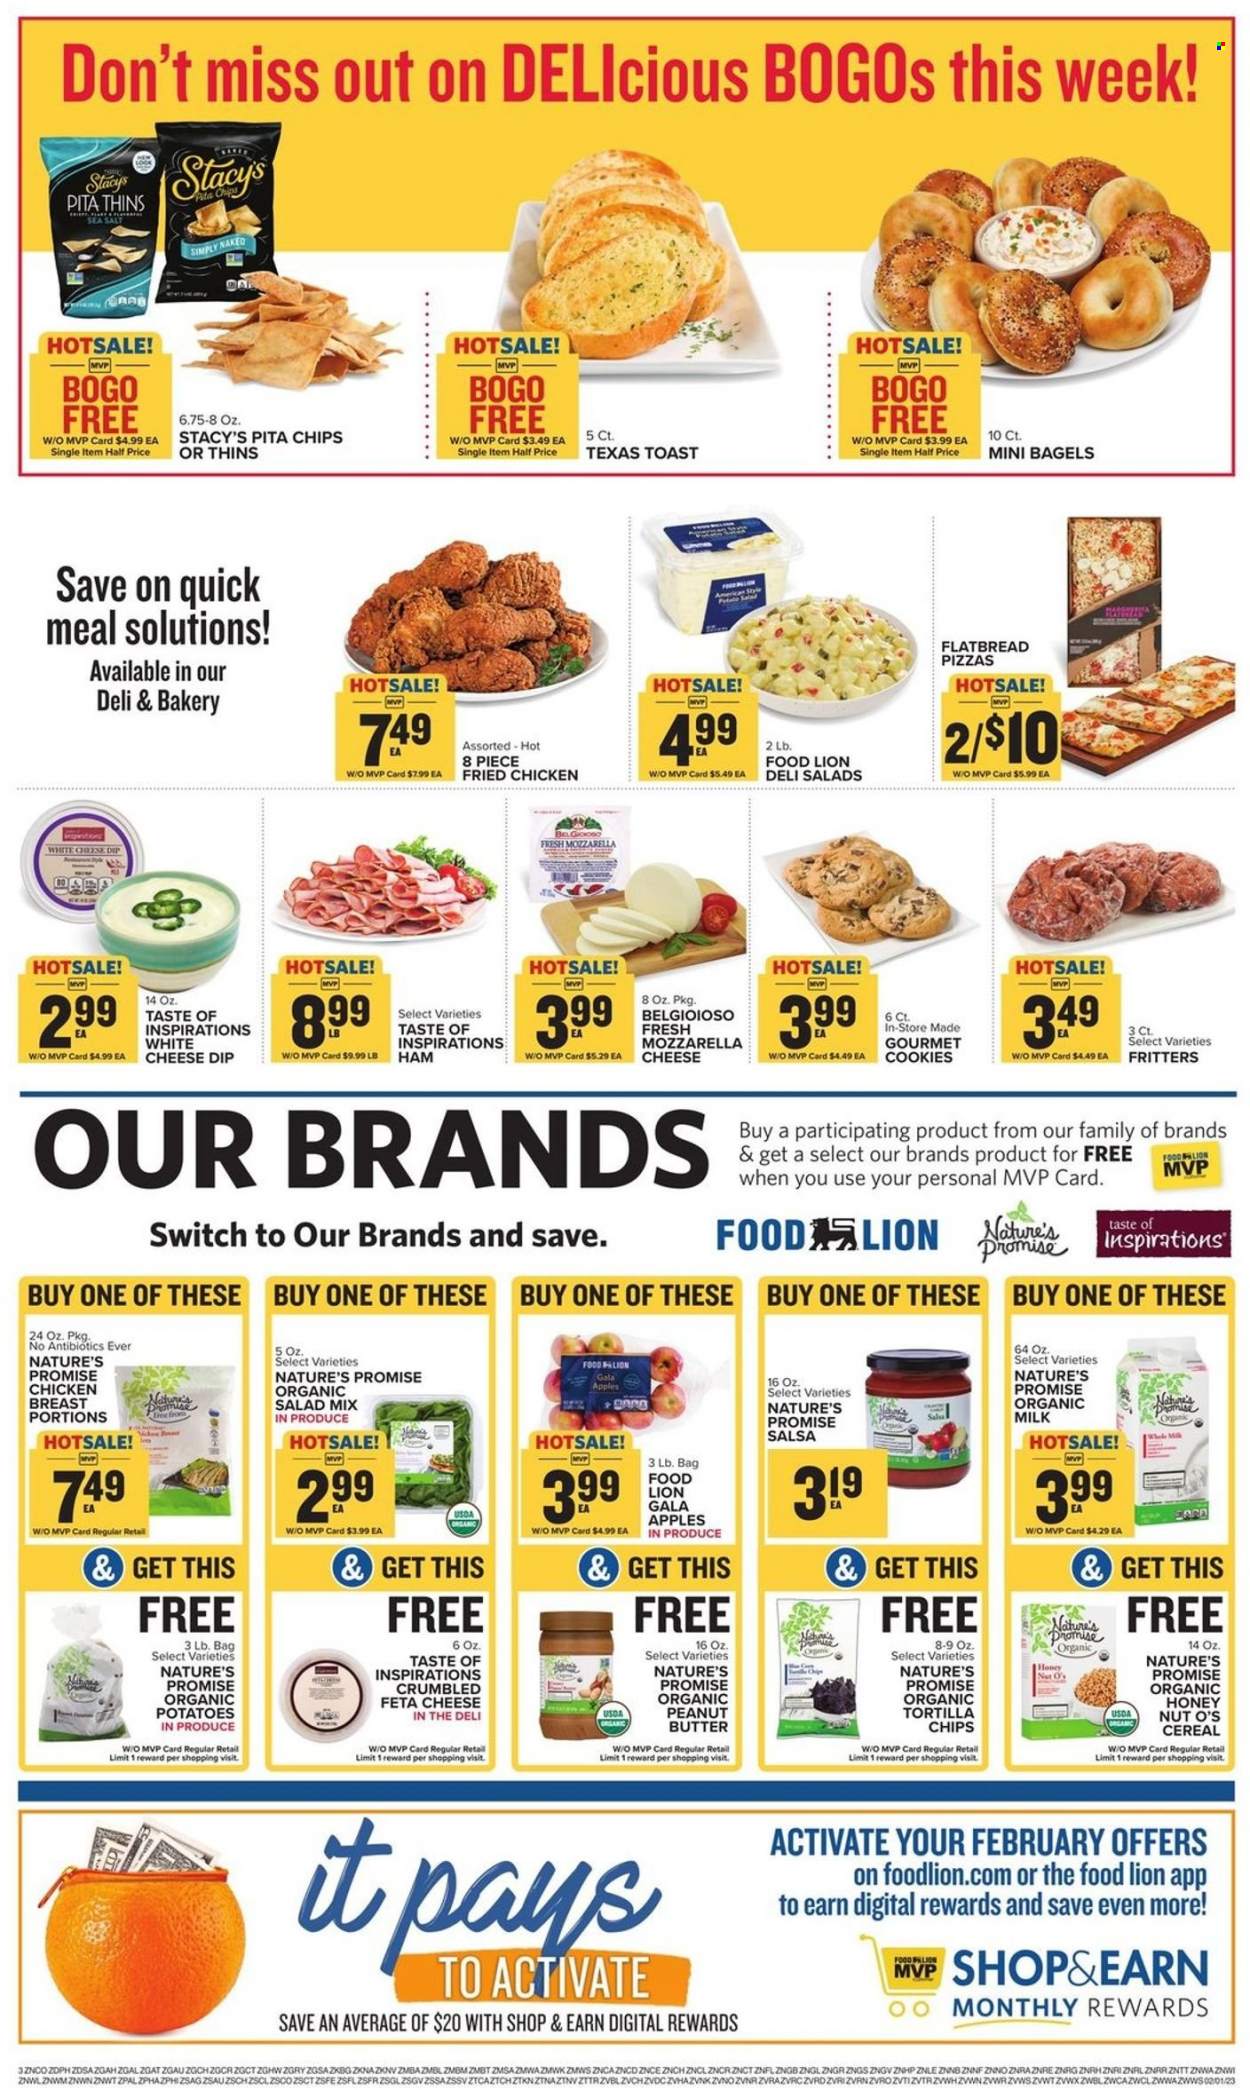 thumbnail - Food Lion Flyer - 02/01/2023 - 02/07/2023 - Sales products - bagels, Nature’s Promise, flatbread, potatoes, salad, apples, Gala, pizza, fried chicken, ham, potato salad, mozzarella, cheese, feta, organic milk, dip, cookies, tortilla chips, chips, Thins, pita chips, cereals, salsa, peanut butter, switch, chicken breasts. Page 3.